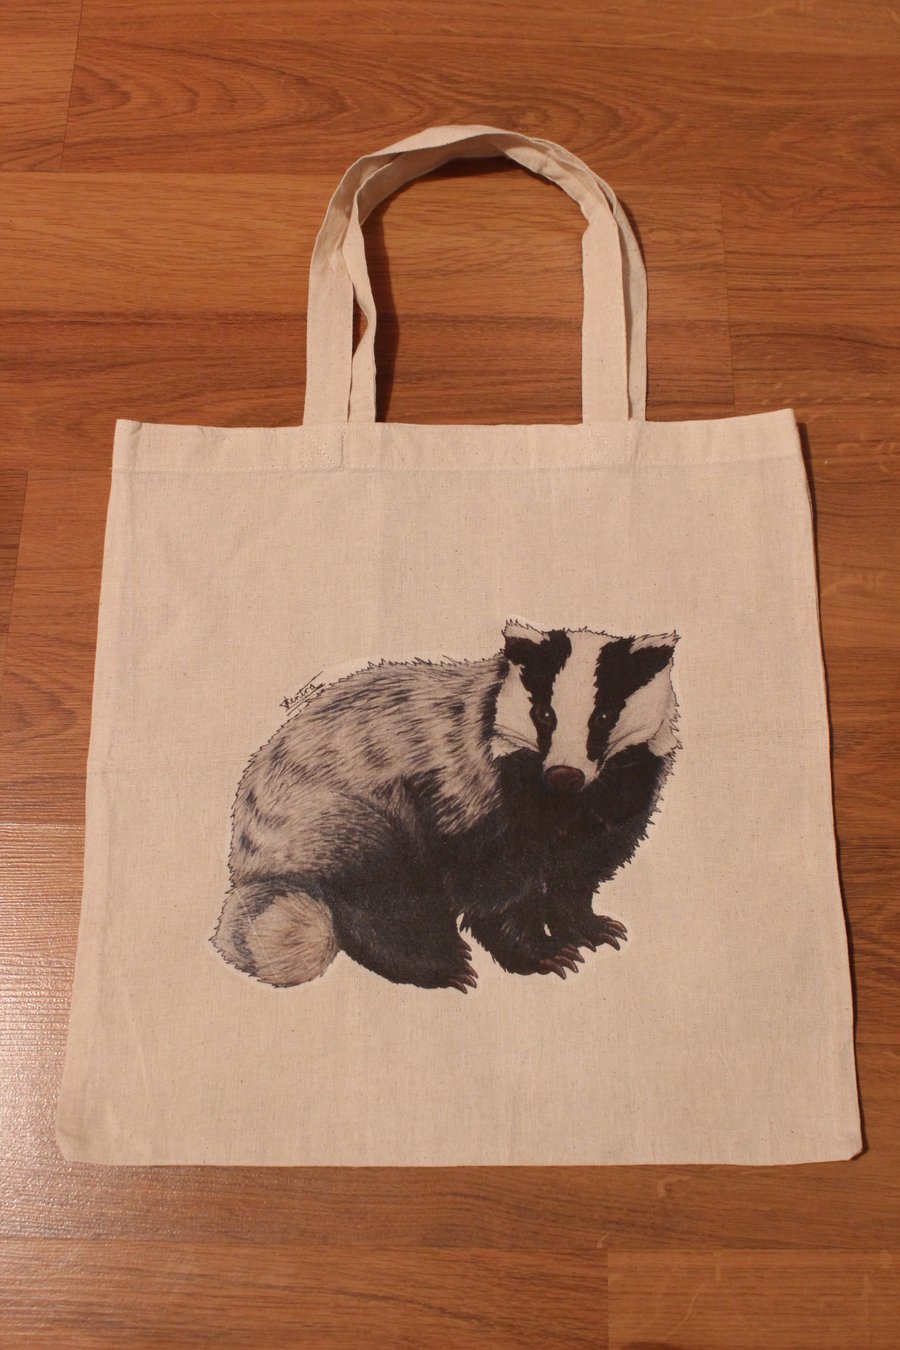 SALE ITEM - Badger Eco Fabric Reusable Shopping Tote Bag